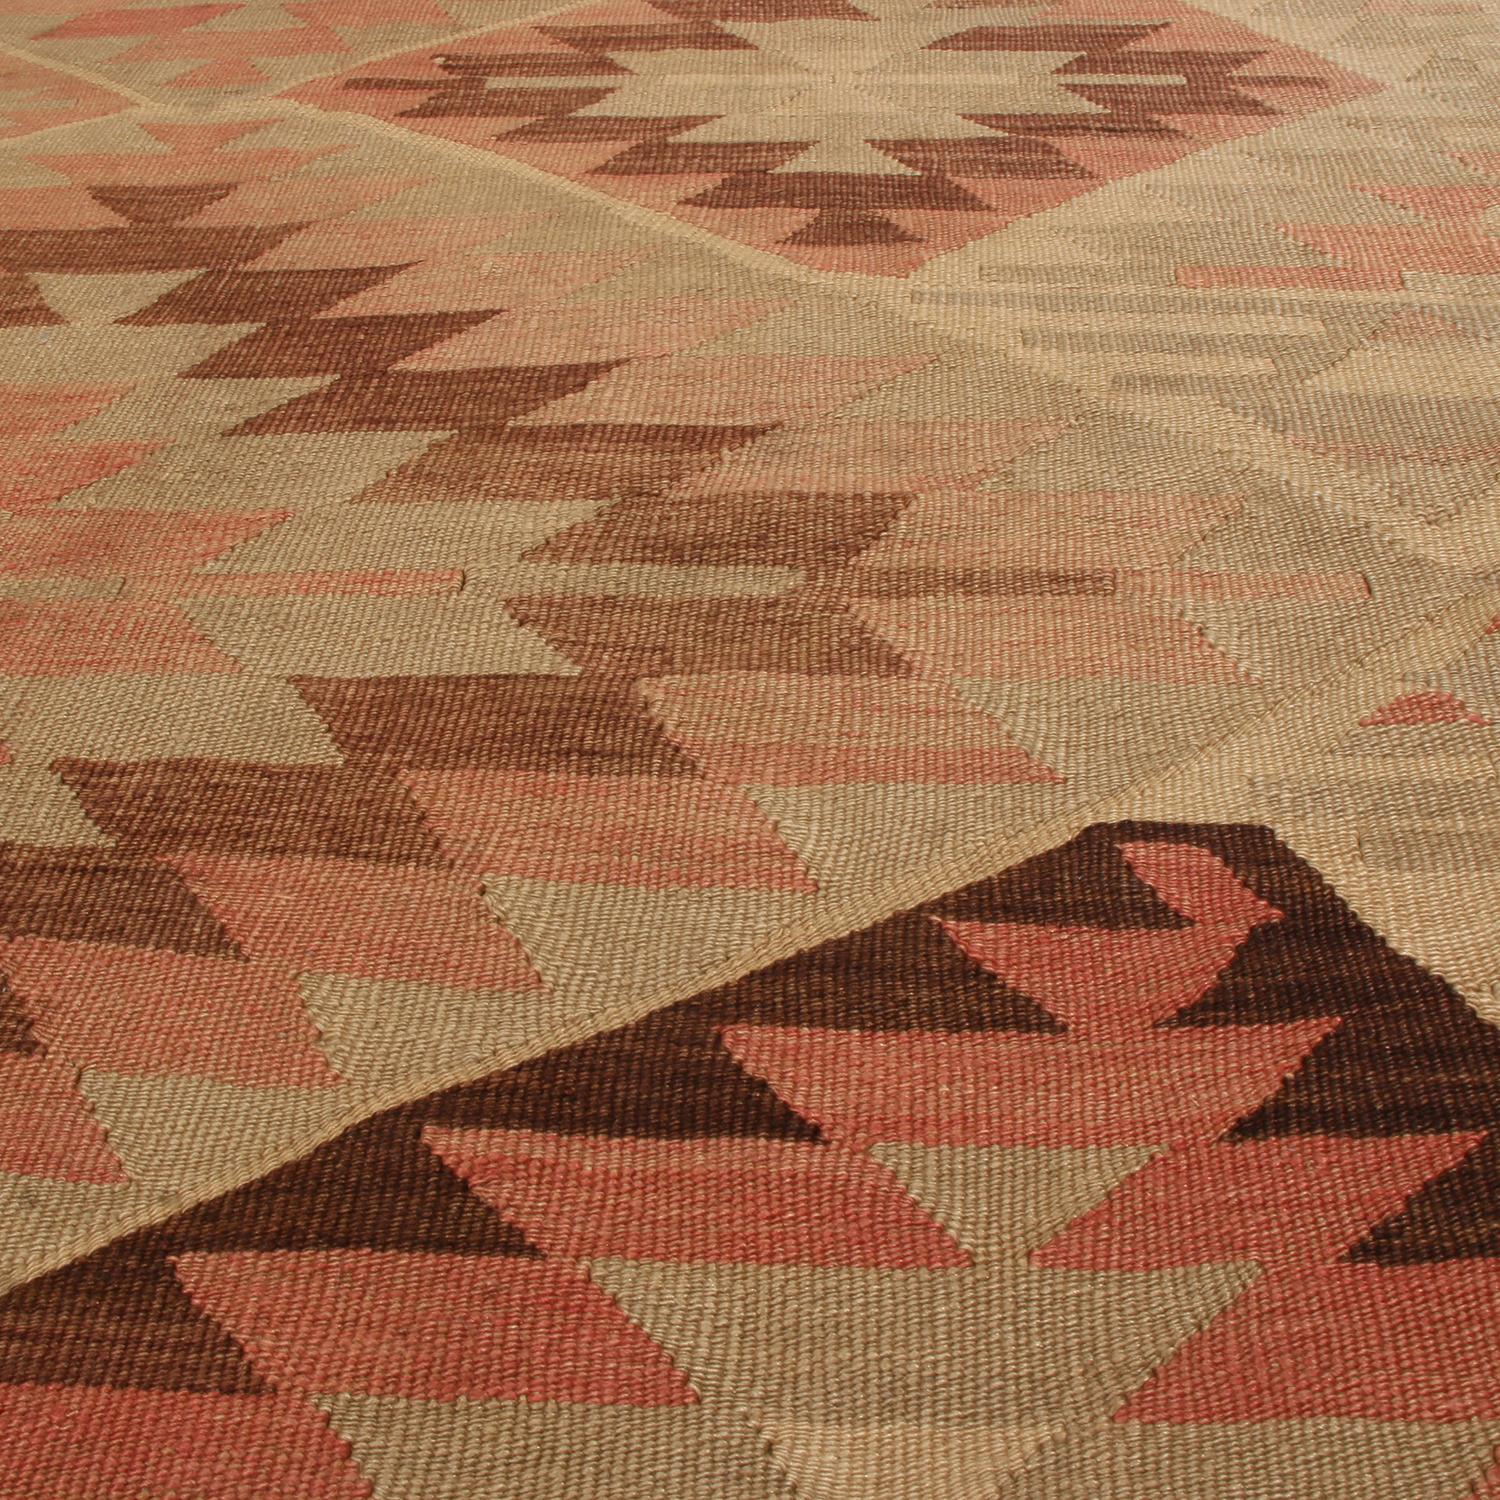 Vintage Esme Beige Brown and Salmon Pink Wool Kilim Rug by Rug & Kilim In Good Condition For Sale In Long Island City, NY